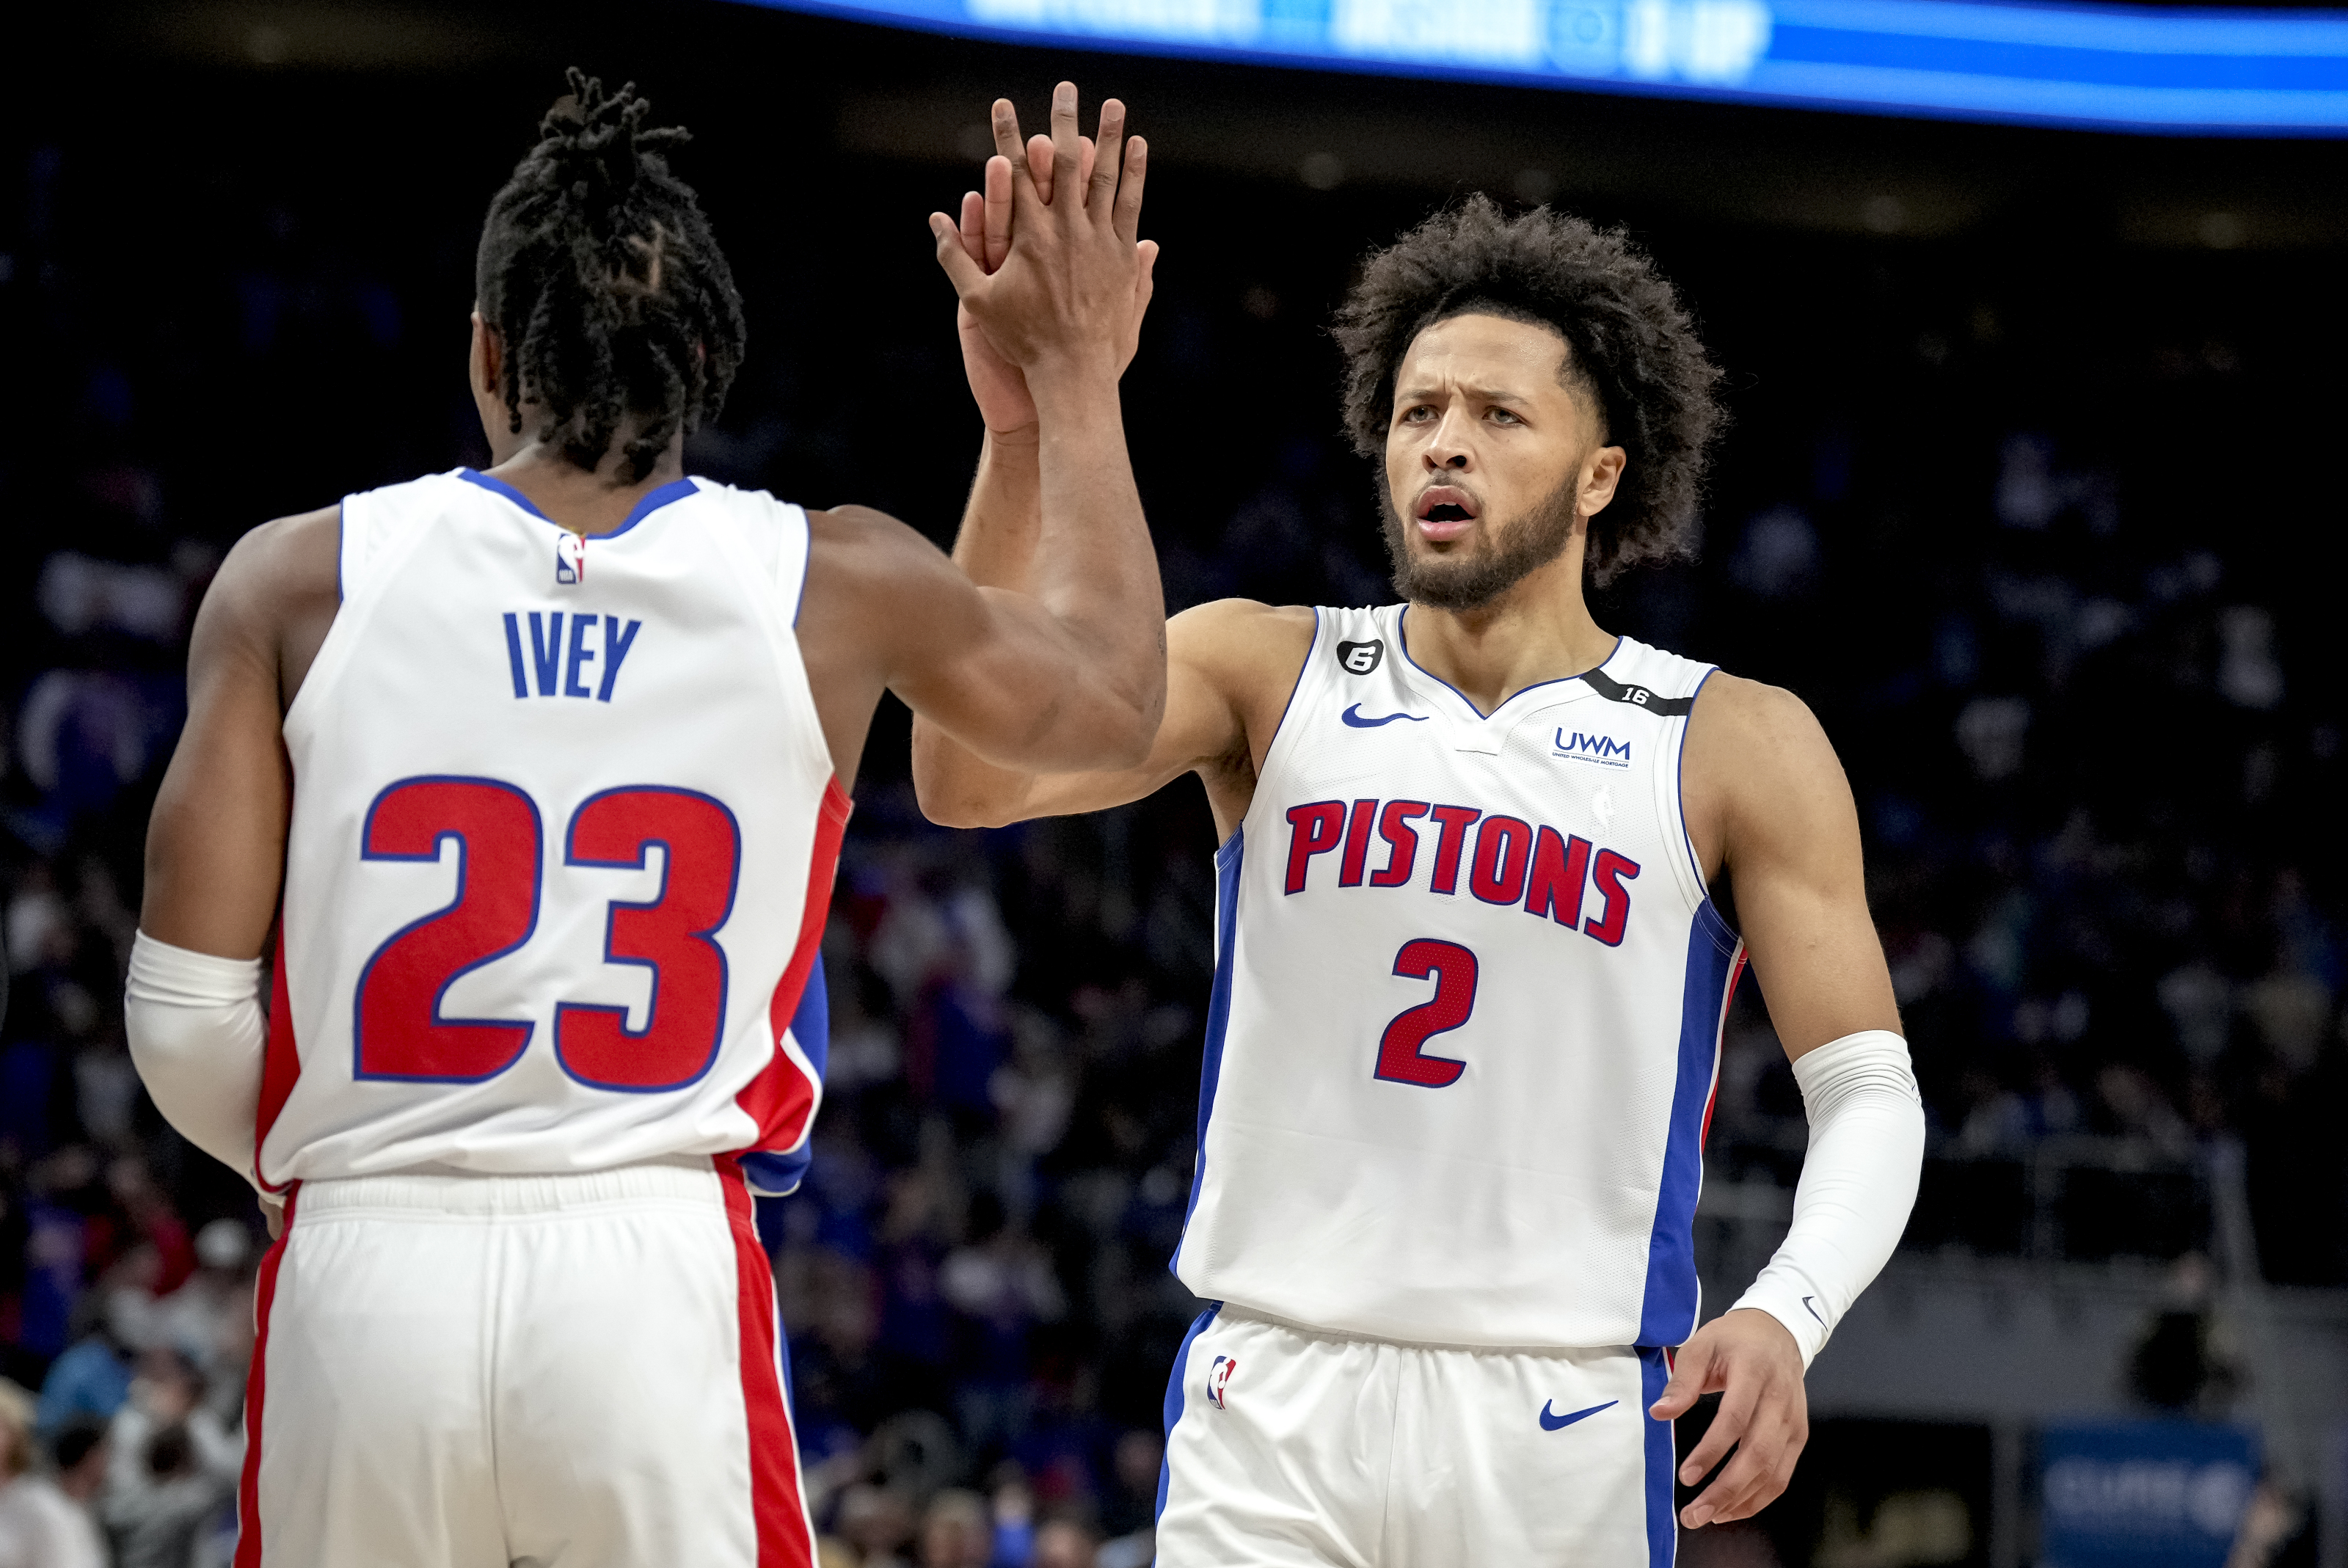 Detroit Pistons: The positive and pathetic from the first 10 games